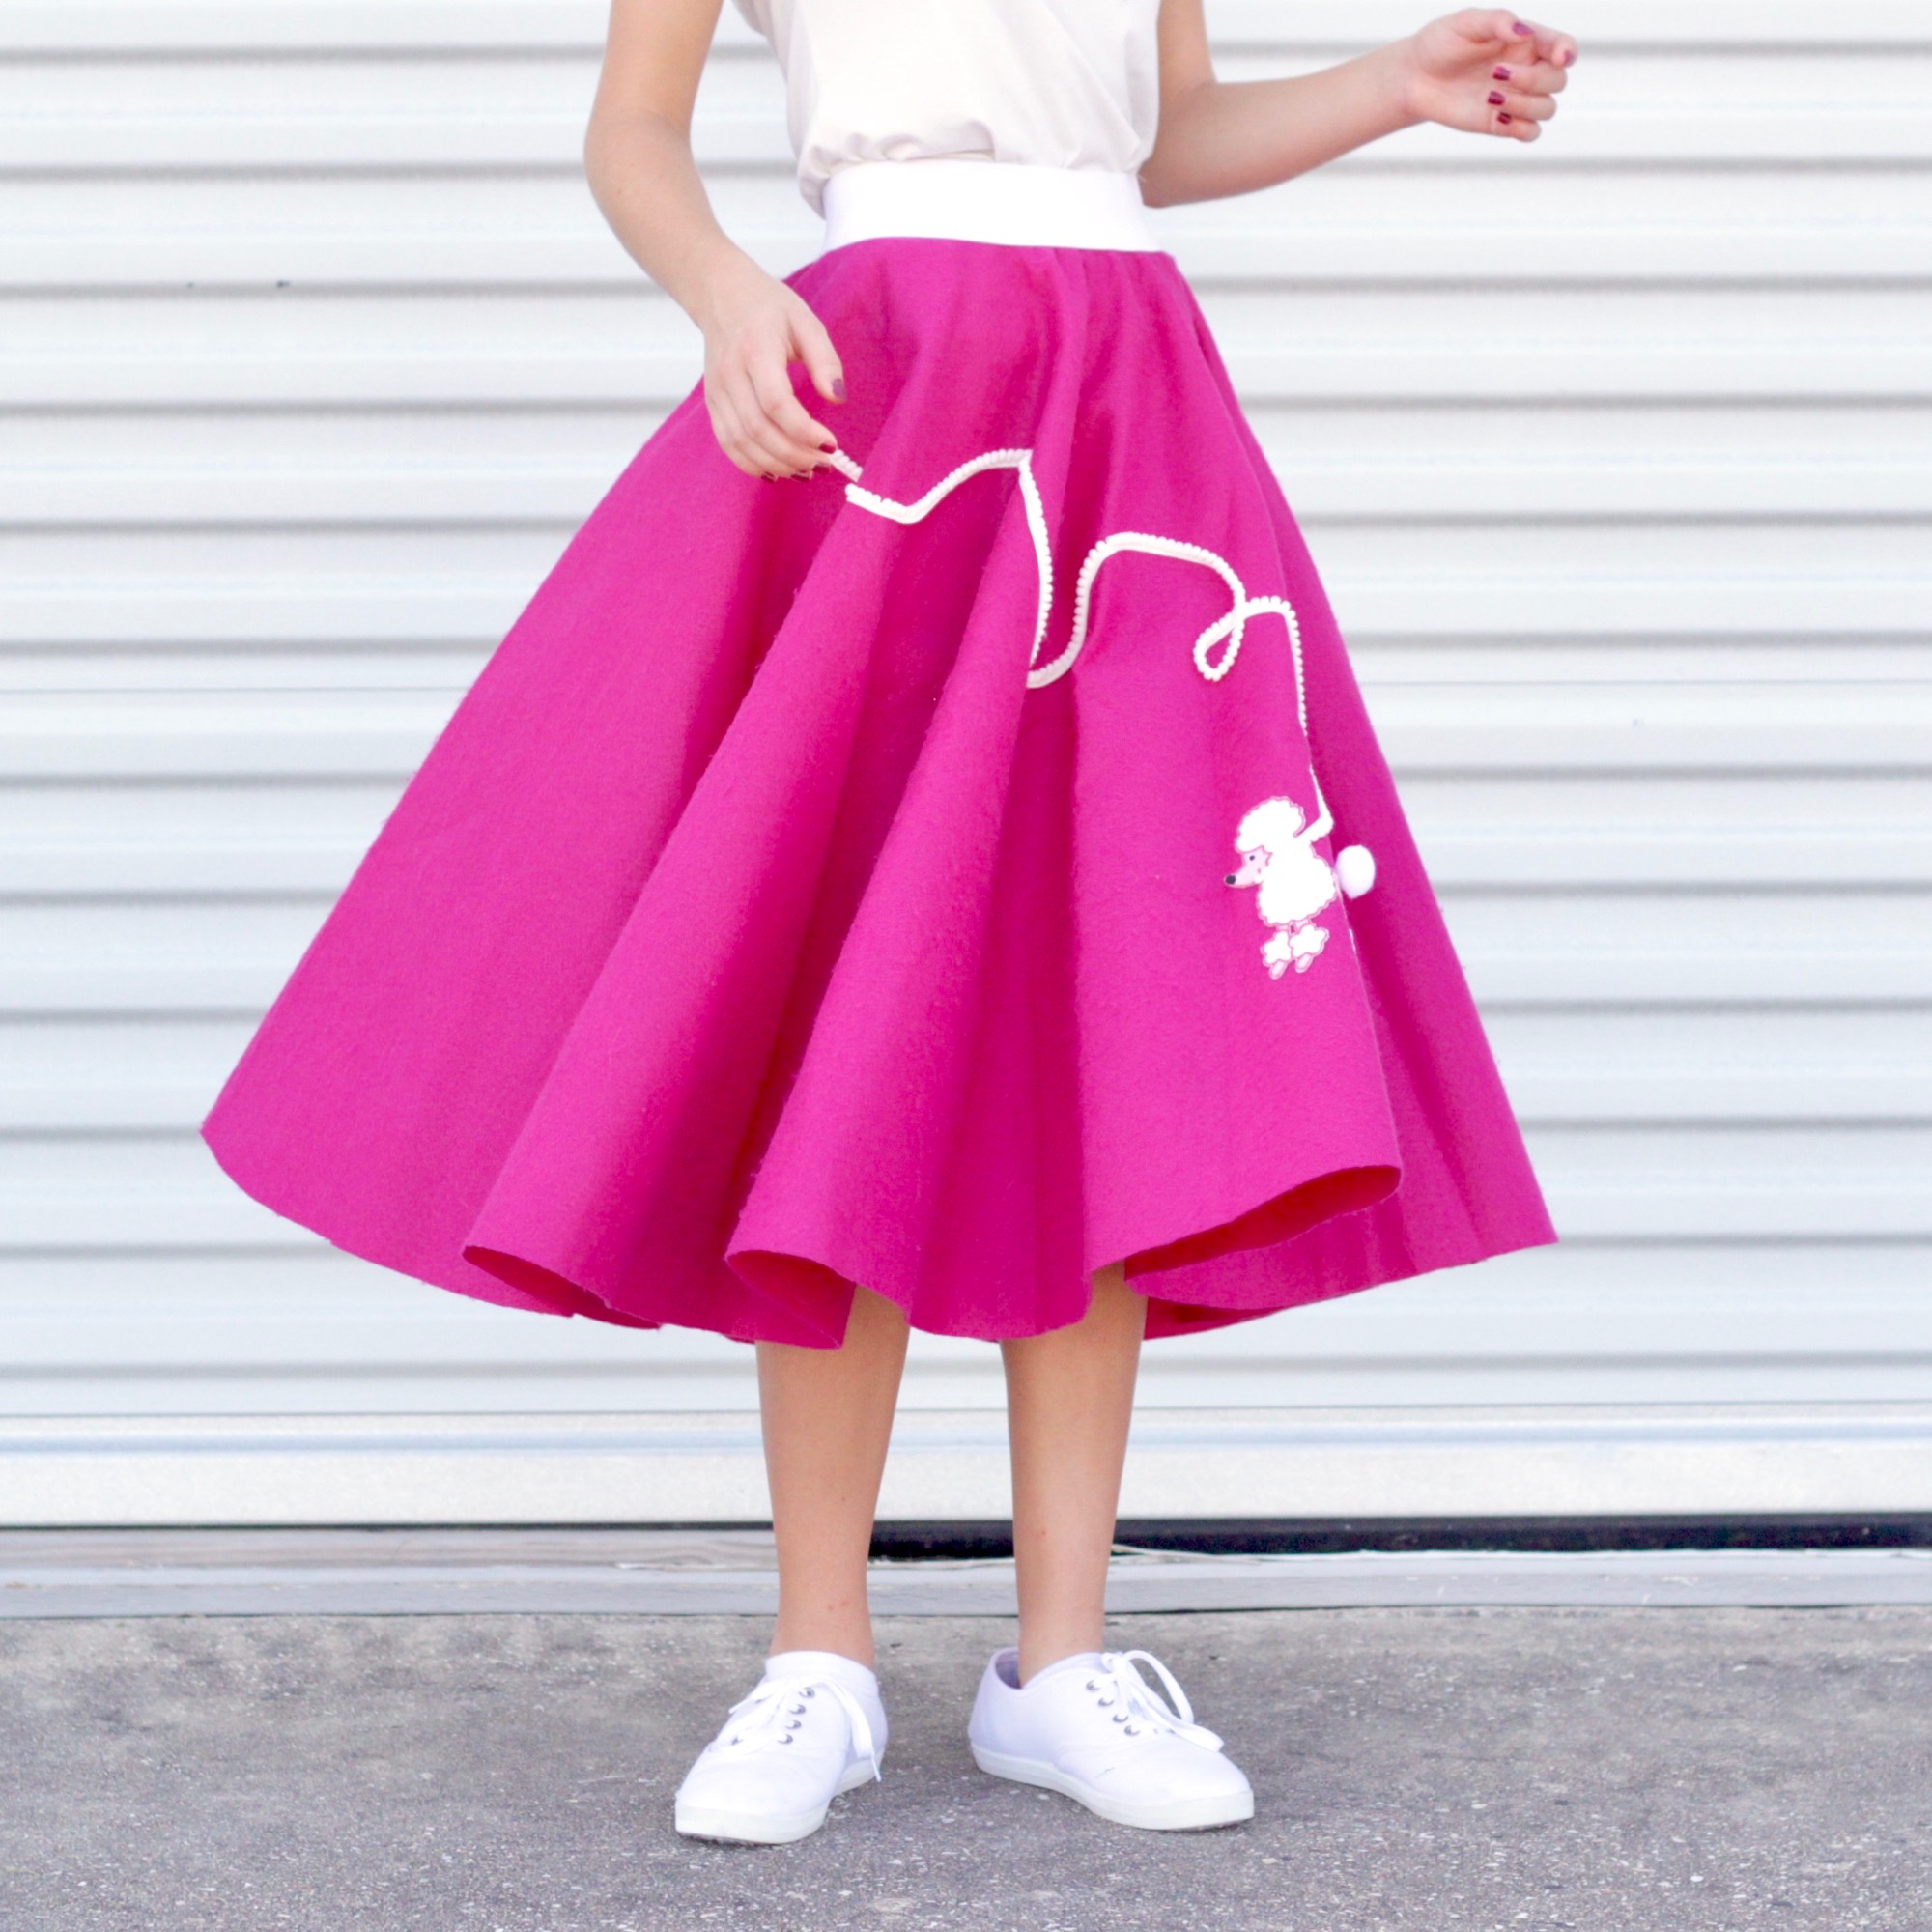 what do you need to make a poodle skirt?